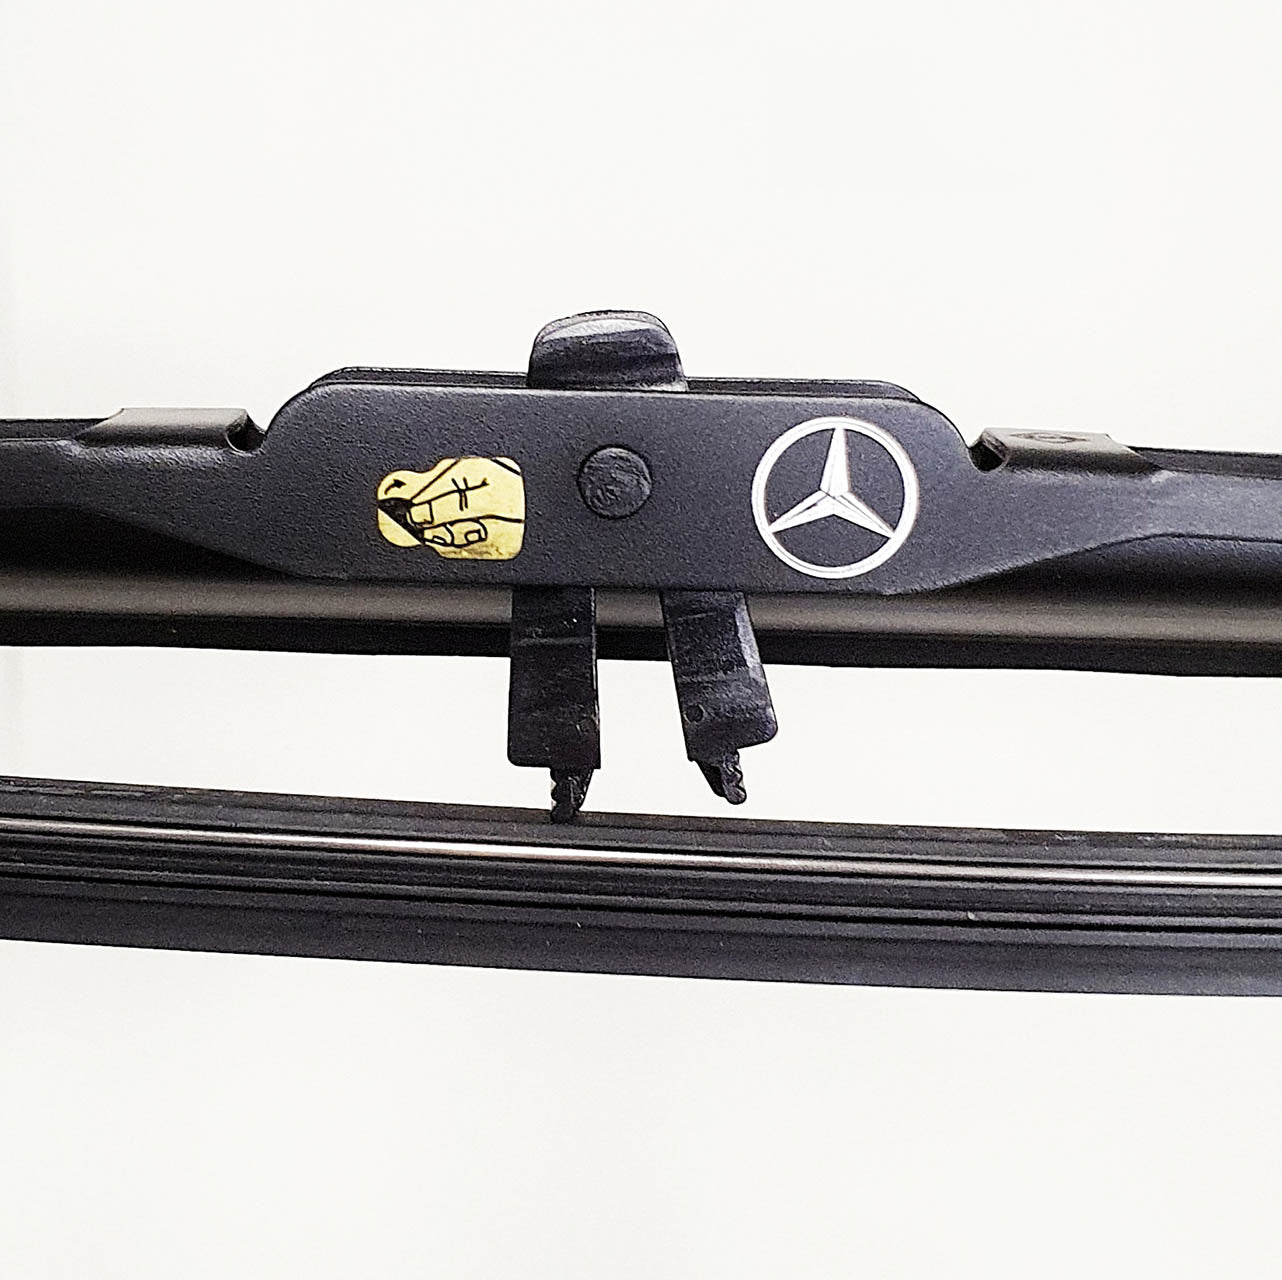 Genuine Mercedes-Benz G Class front wiper blades for 461 and 463 models